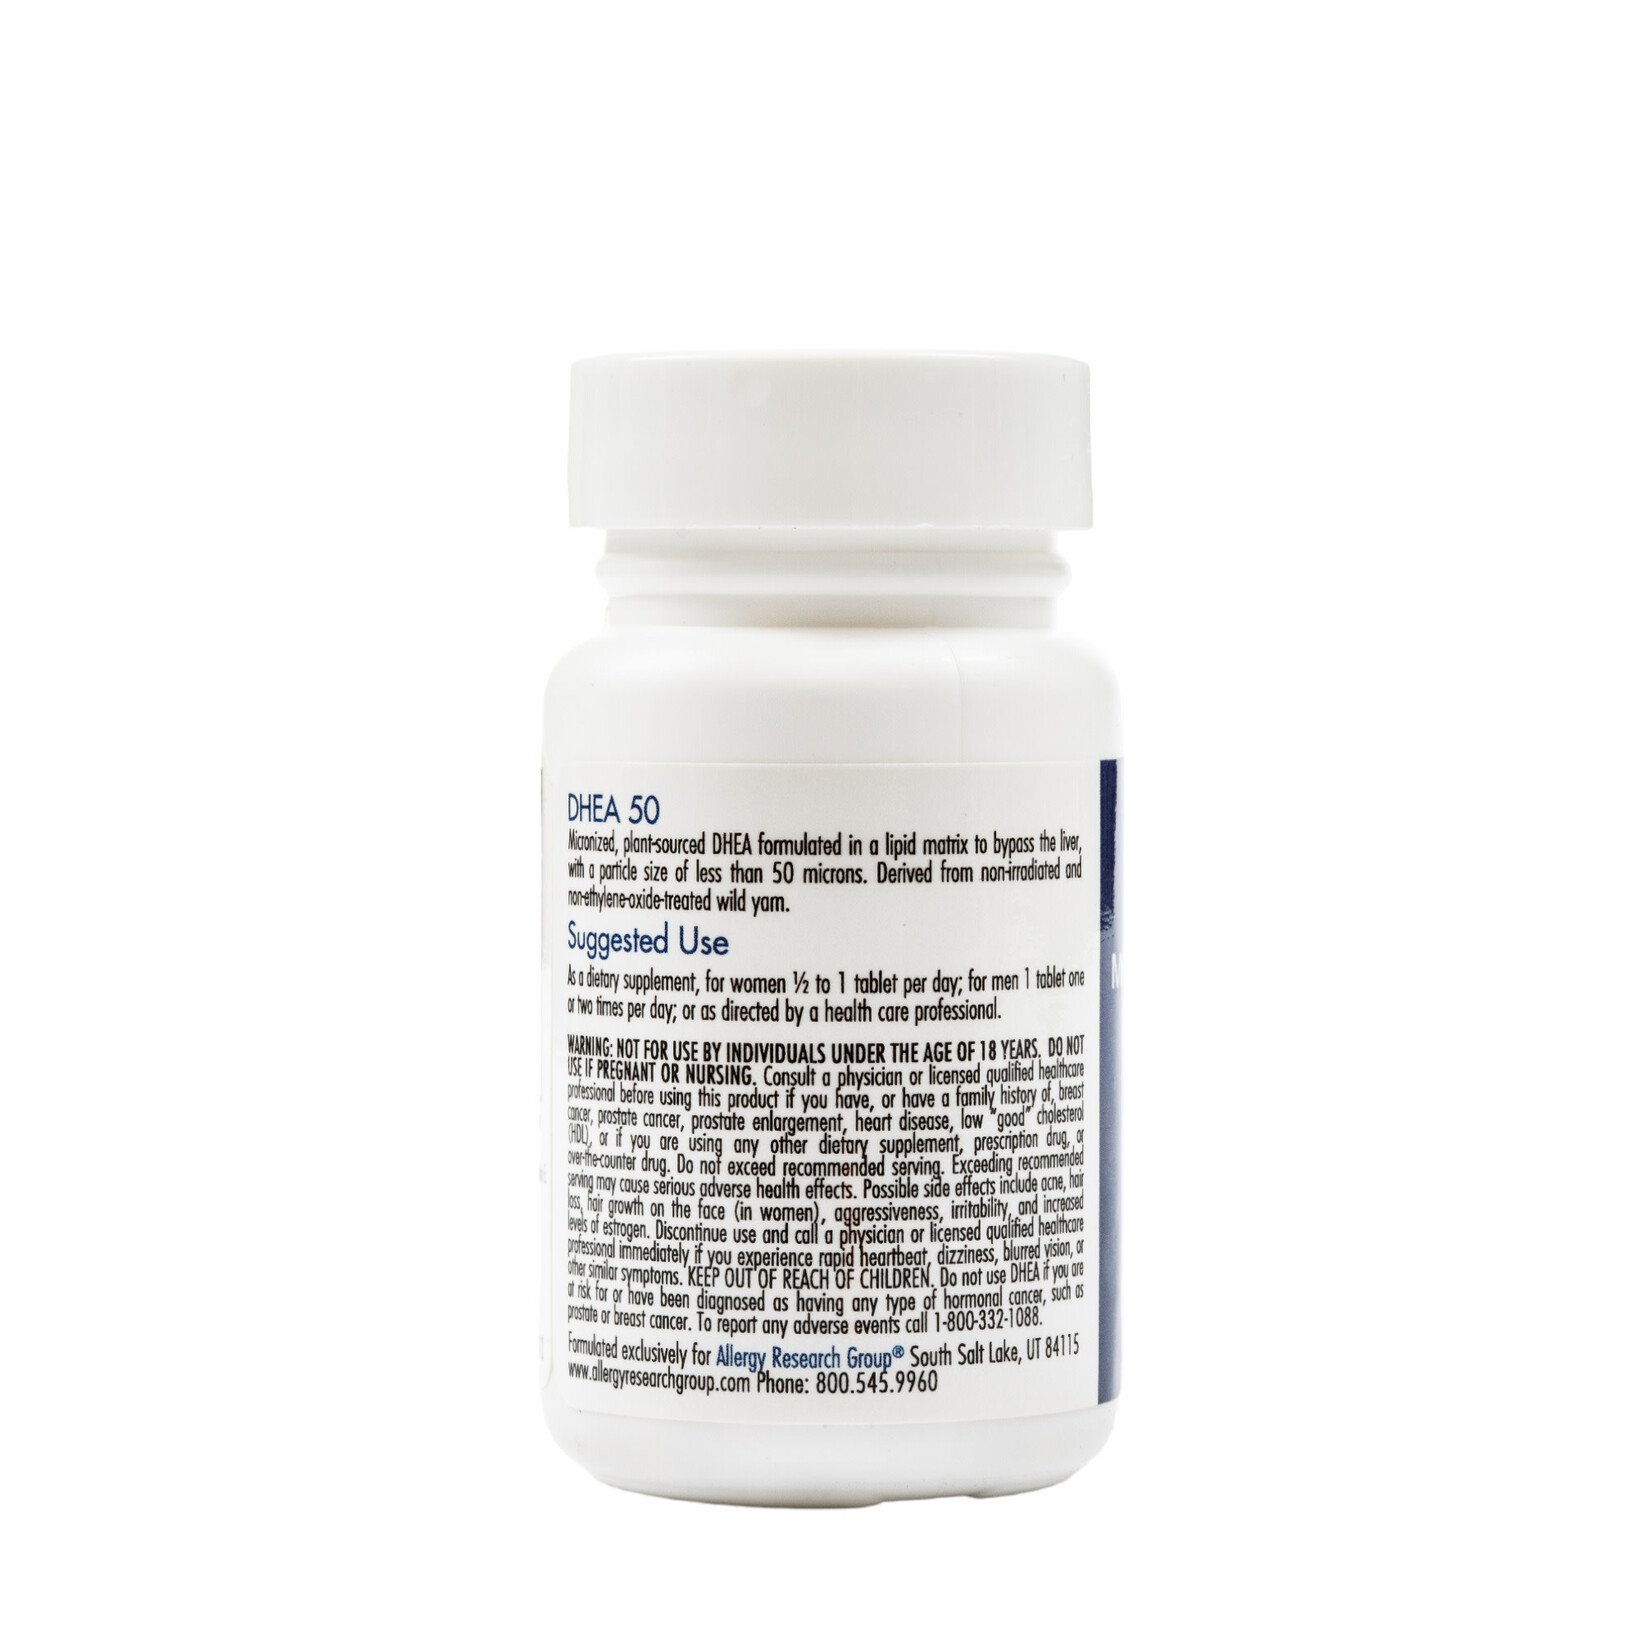 Allergy Research Group DHEA 50mg 60t Allergy Research Group